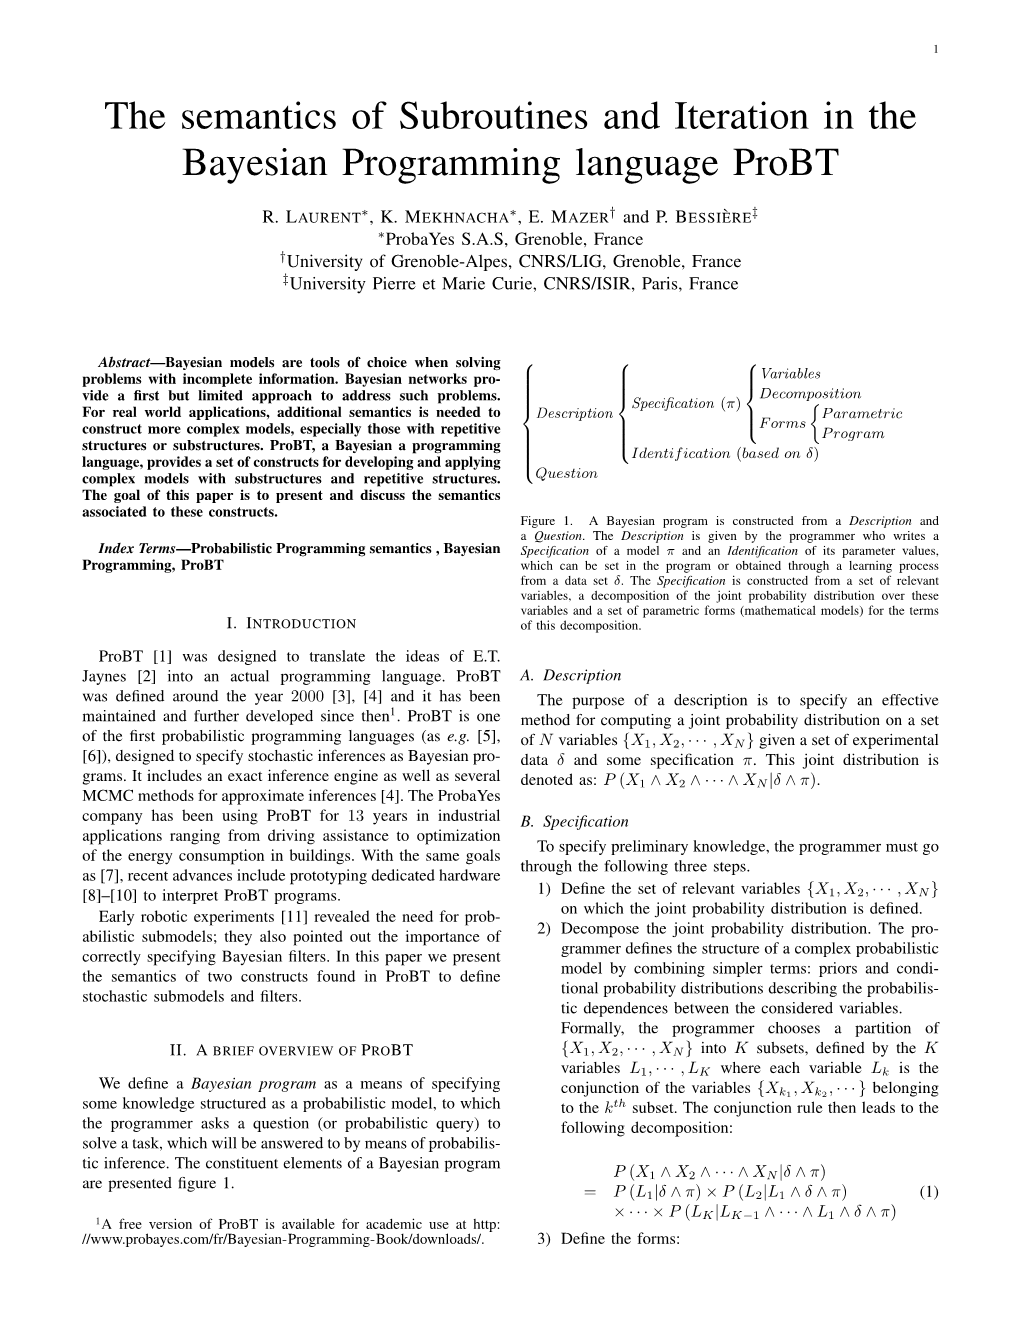 The Semantics of Subroutines and Iteration in the Bayesian Programming Language Probt